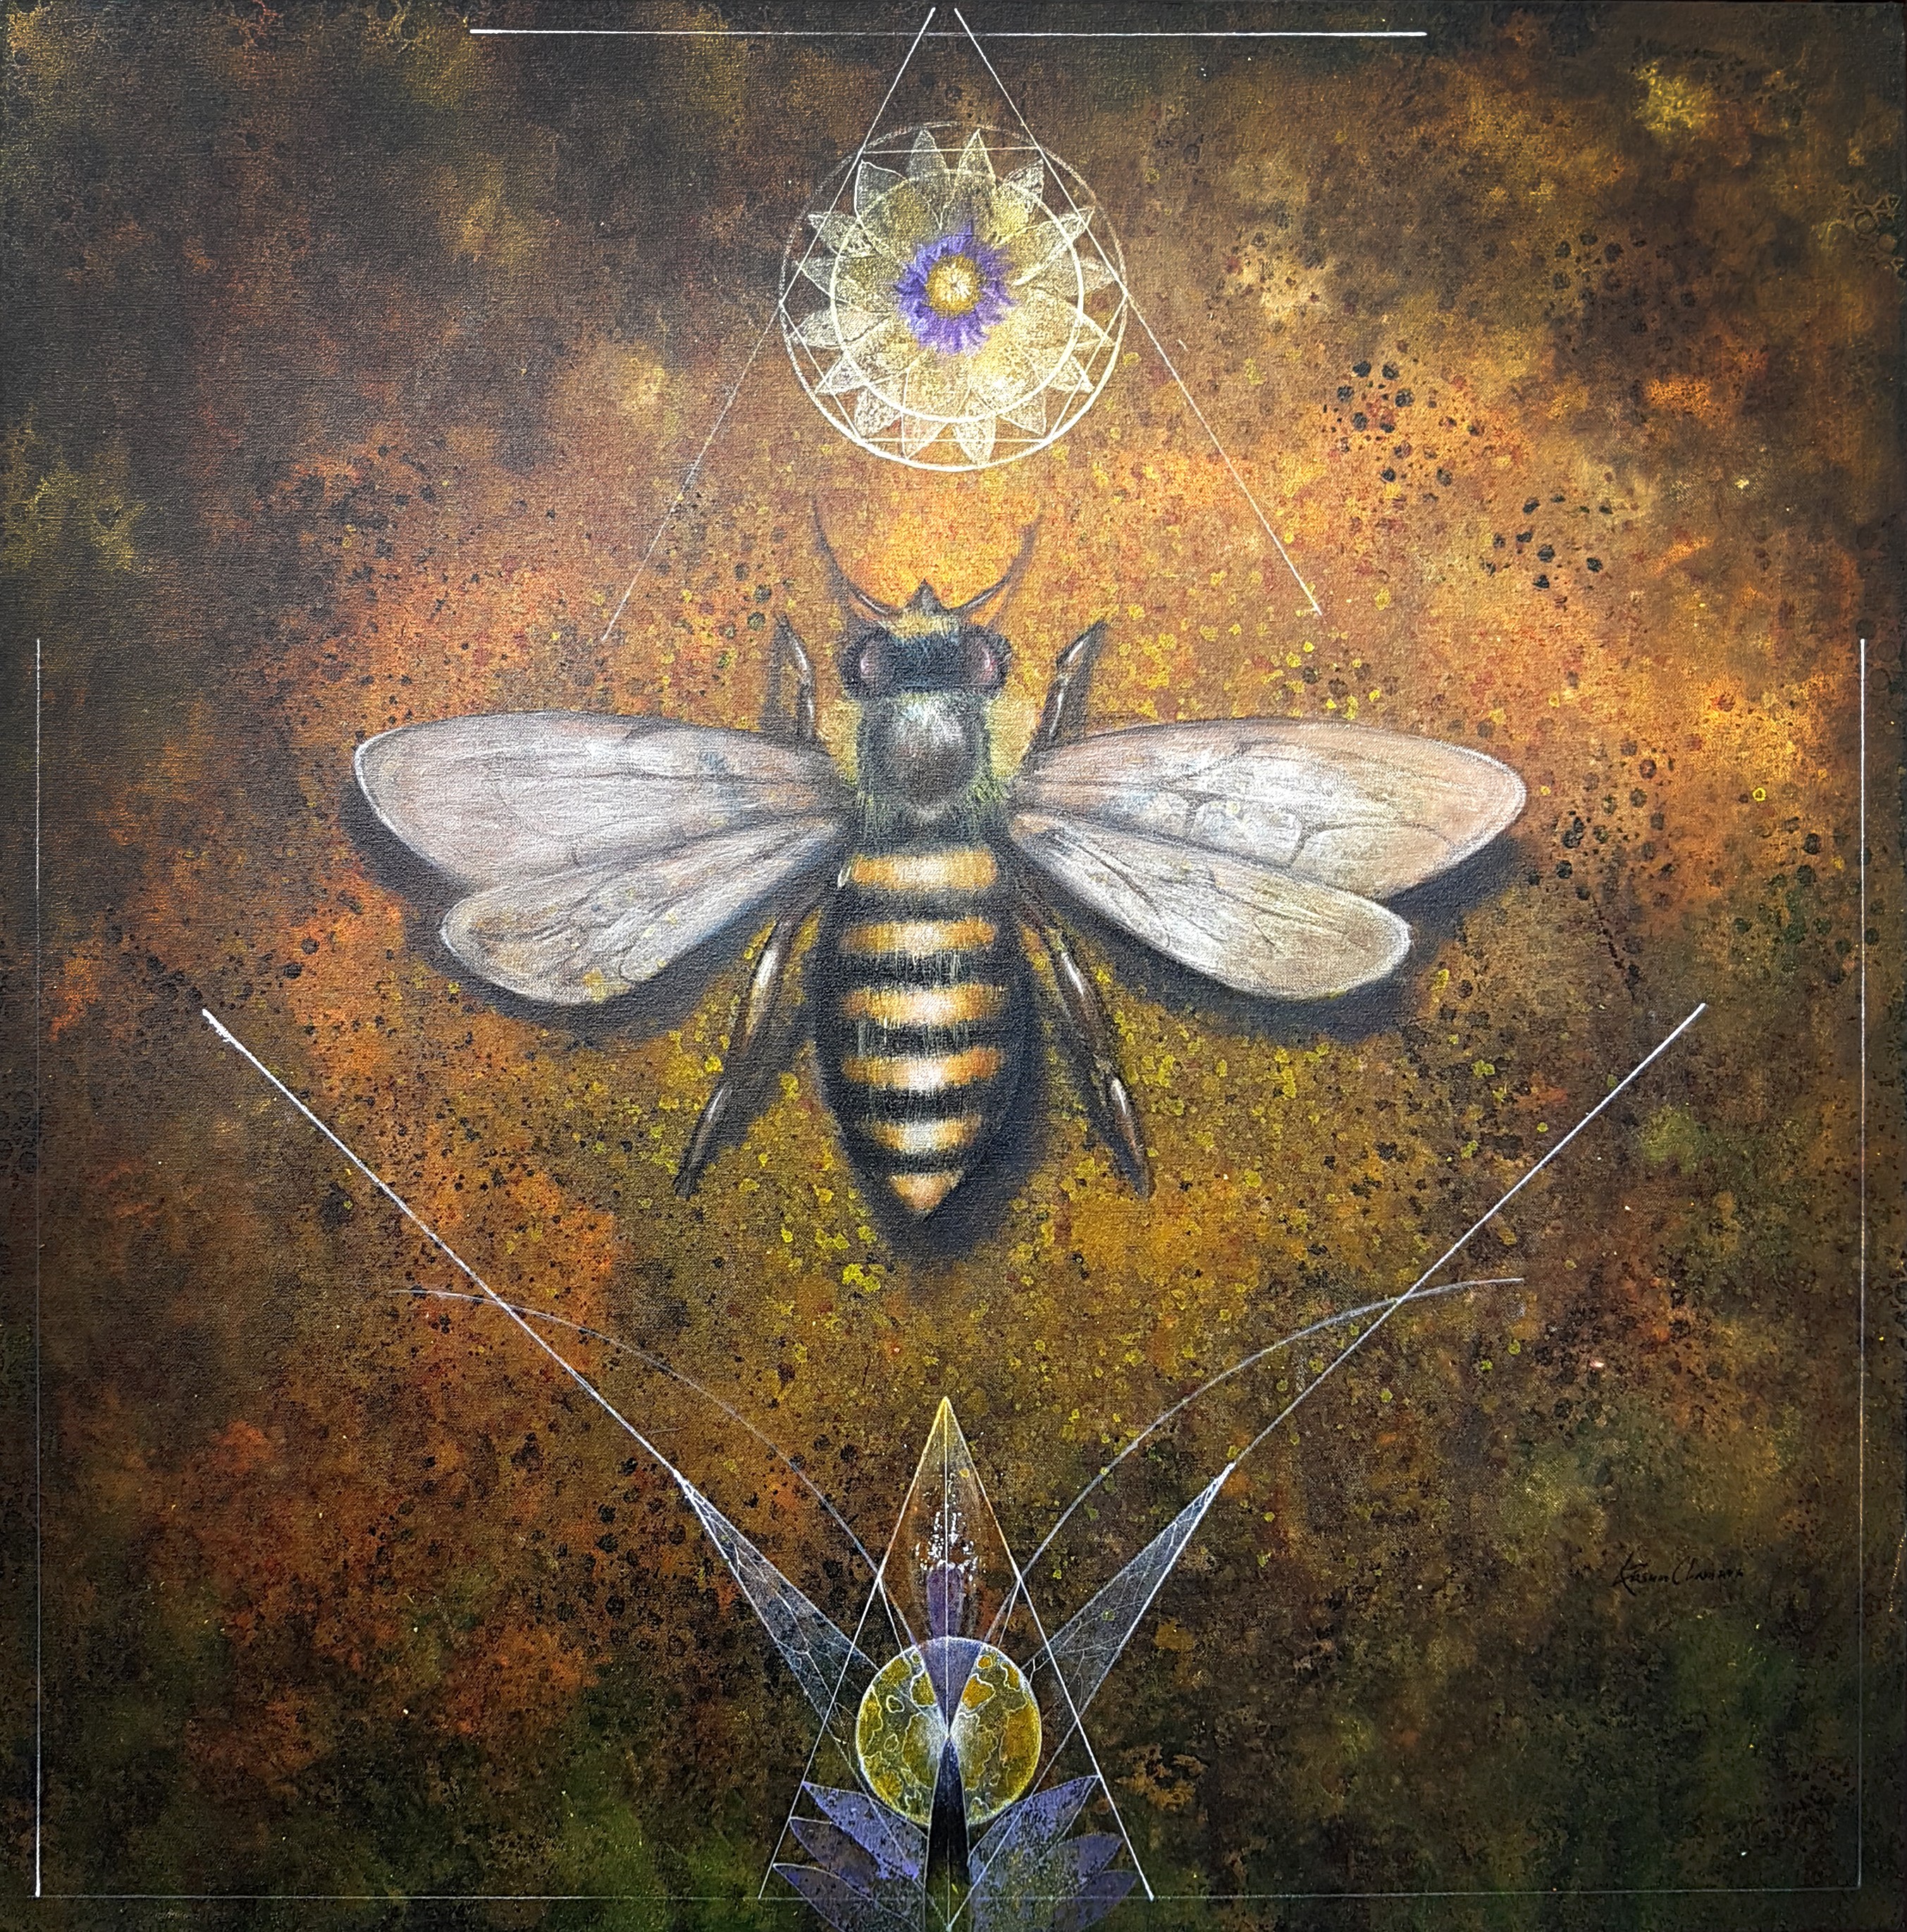 Bee in a Geometric Composition by kasun chamara wickramasinghe